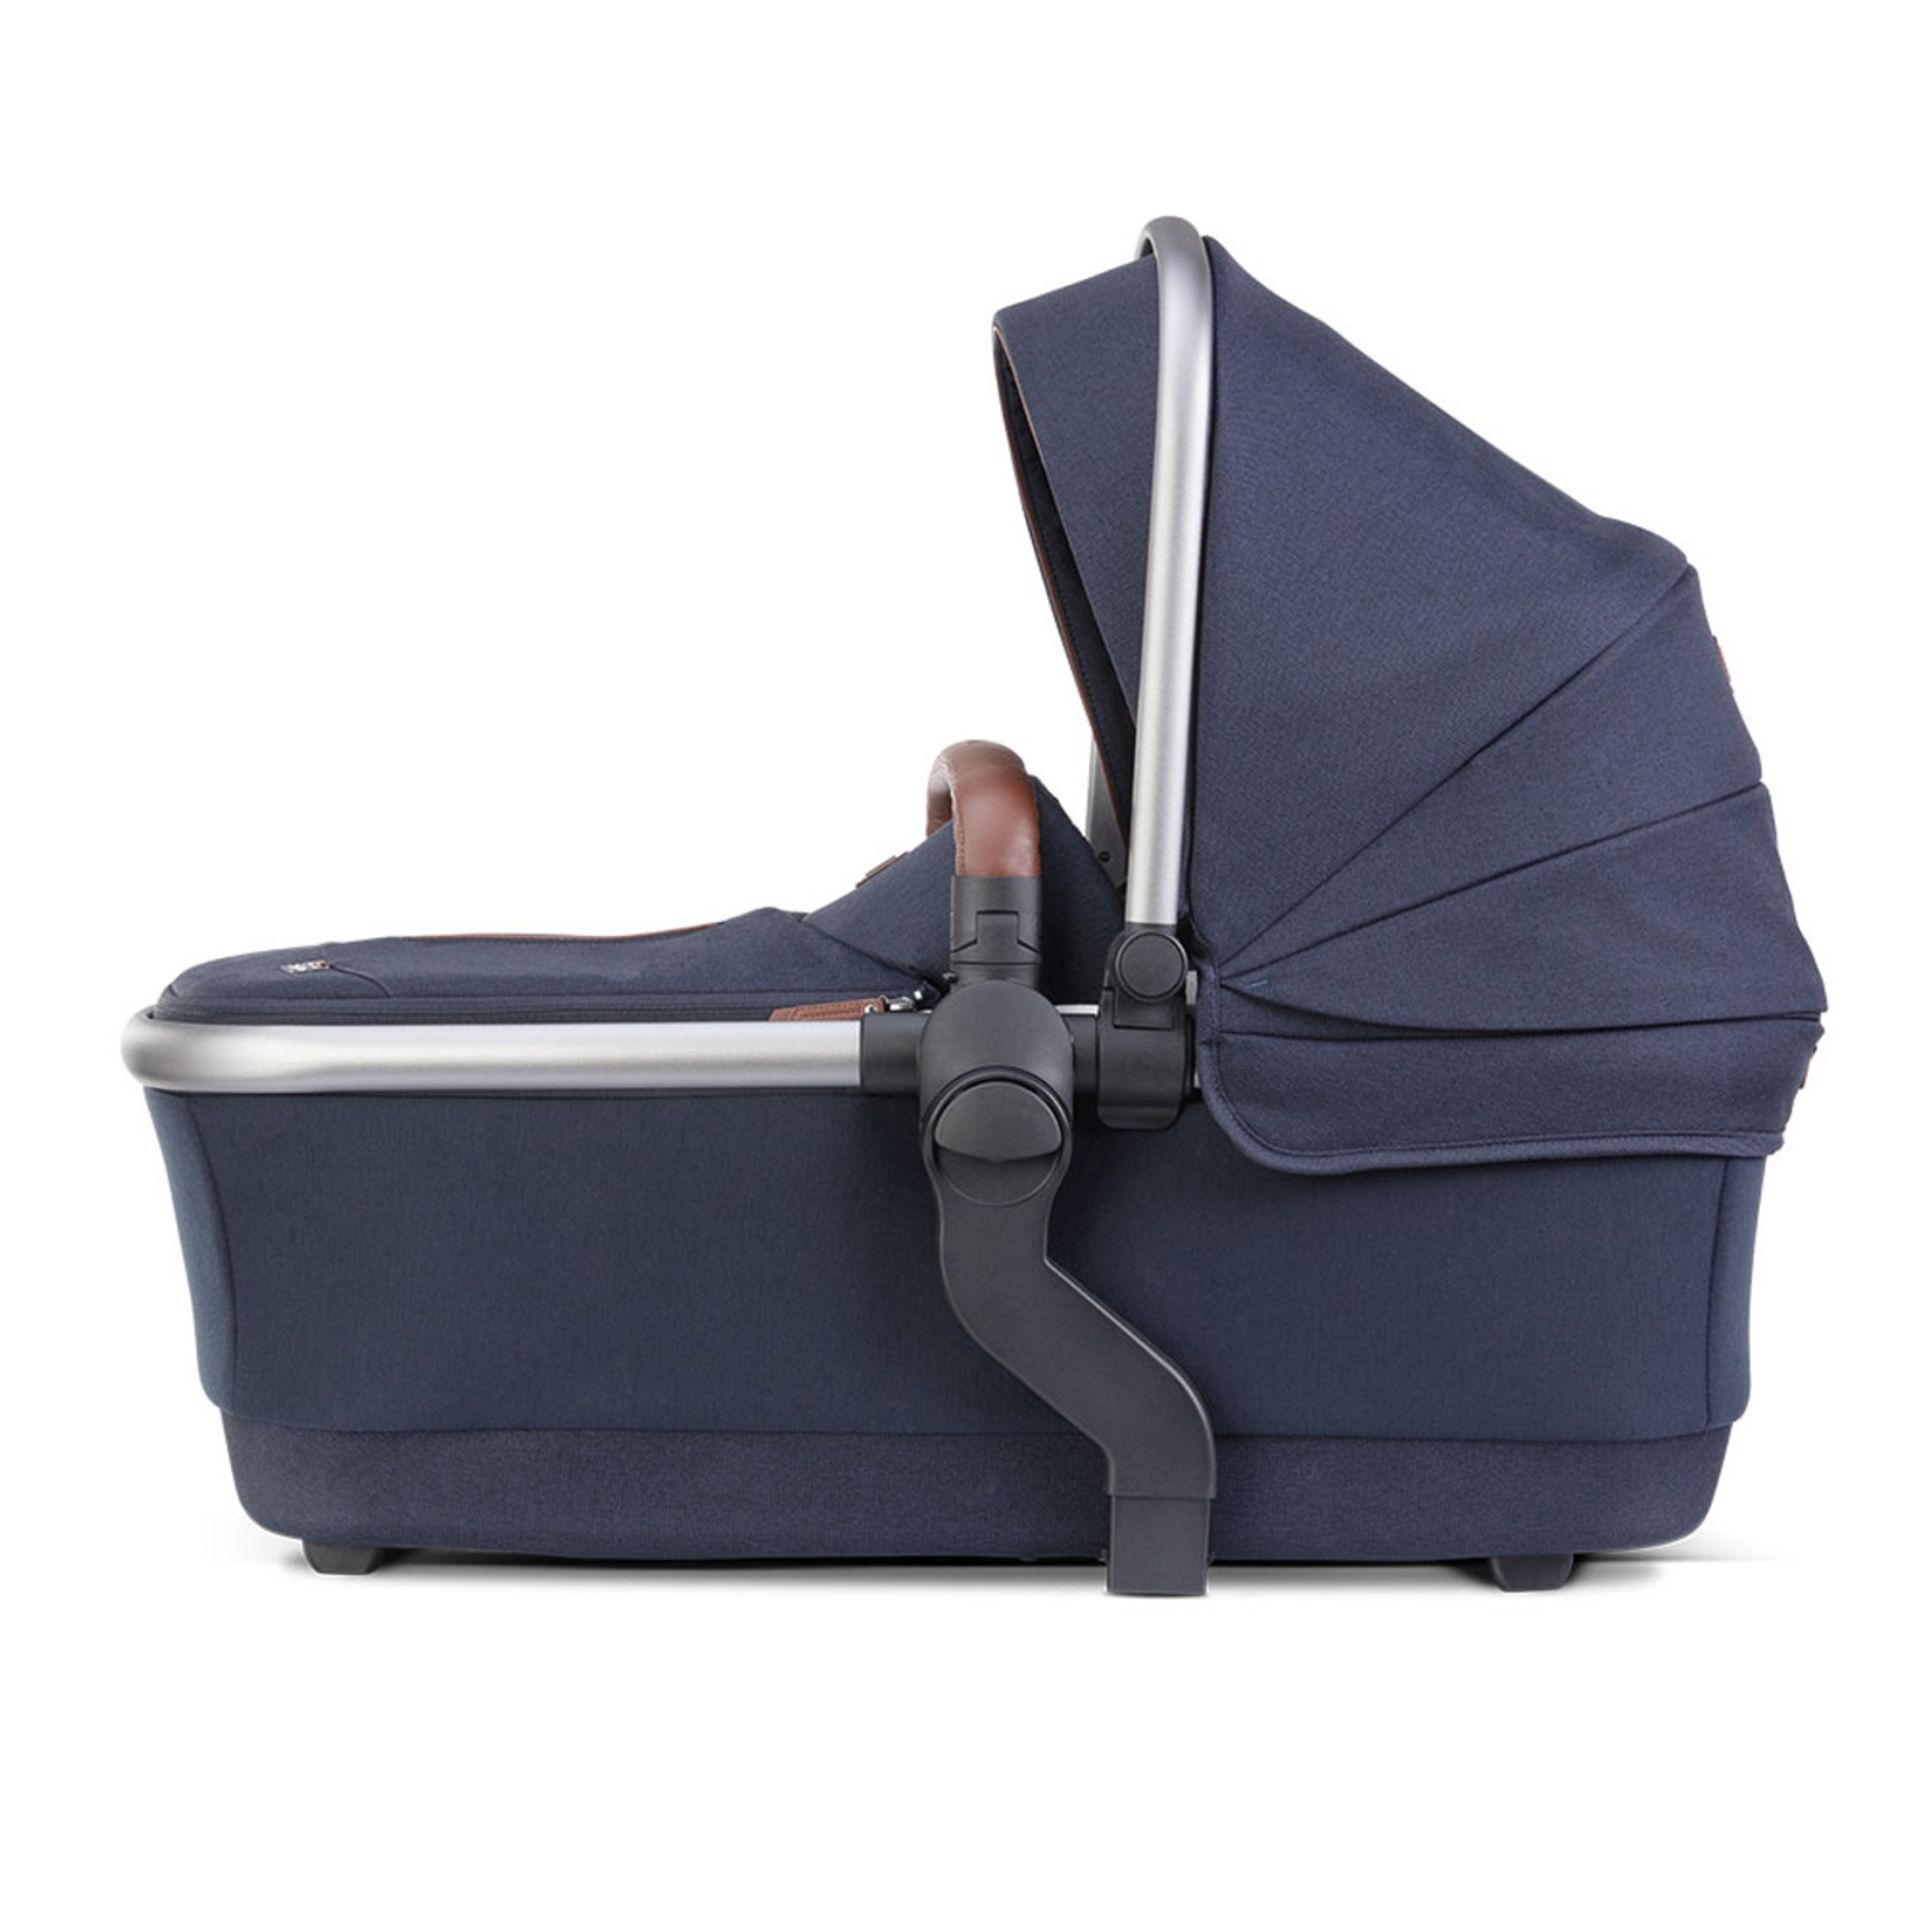 NEW & BOXED SILVER CROSS Wave Carrycot - INDIGO. RRP £275 R19-5. Silver Cross Wave 21 Carrycot,